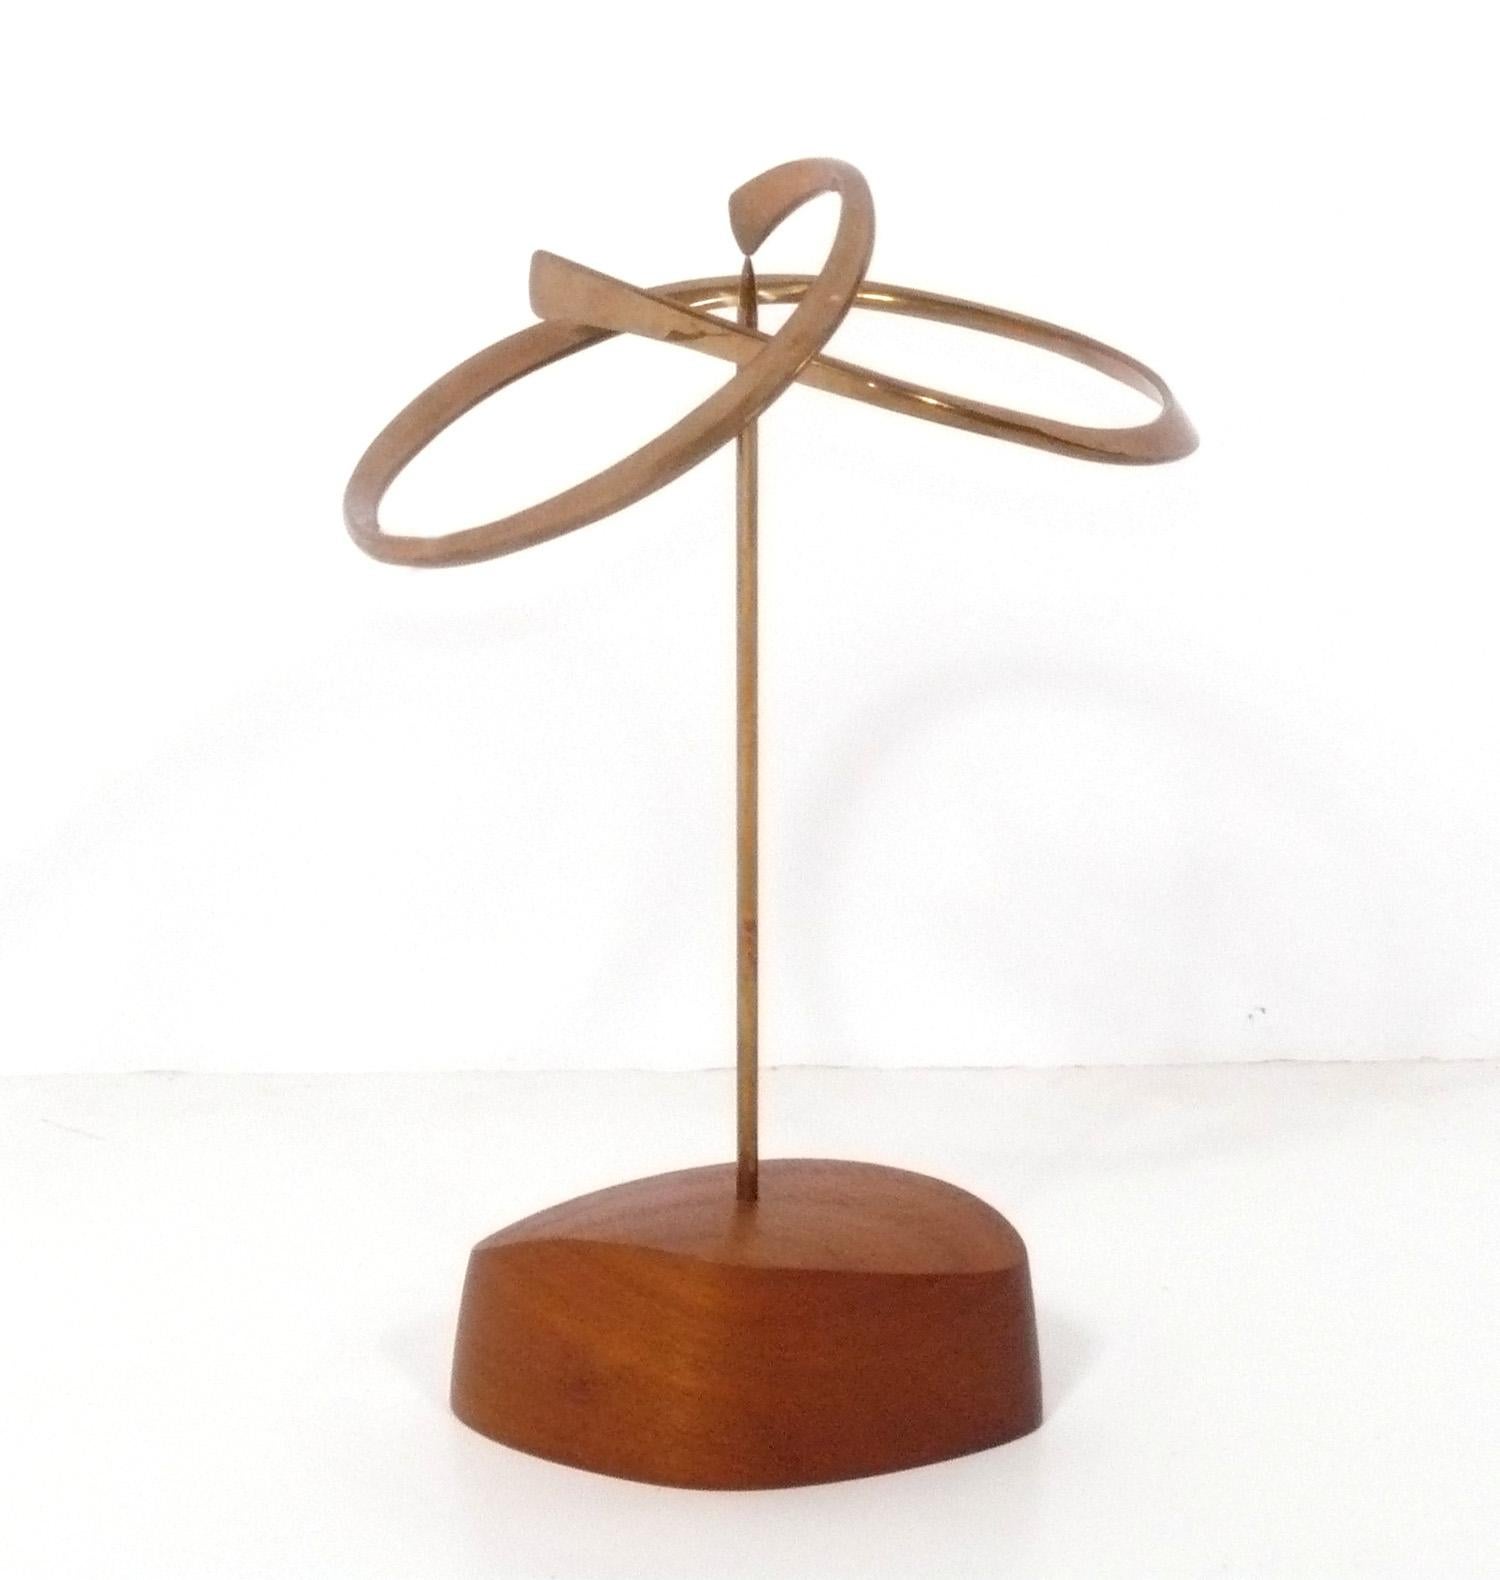 Mid-Century Modernist Bronze and Teak Sculpture by Russell Secrest, American, circa 1970s. Russell Secrest (1935-2010) is known for both his sculptures and modernist jewelry designs. Born in Muncie, Indiana, Secrest earned an Associates in Applied